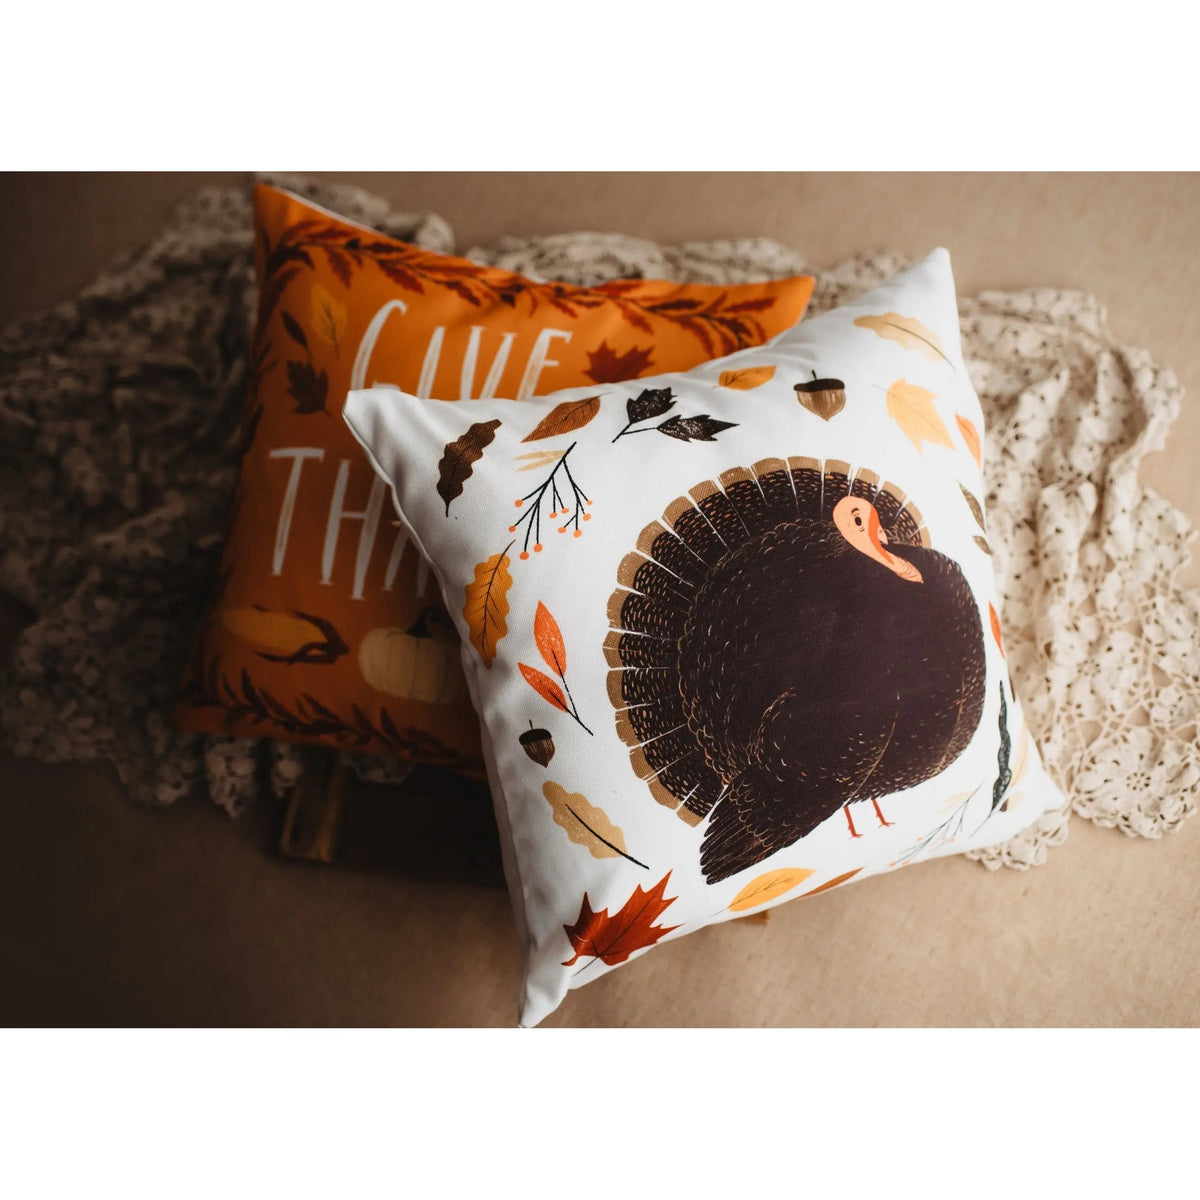 Give Thanks Pillow | Pillow Cover